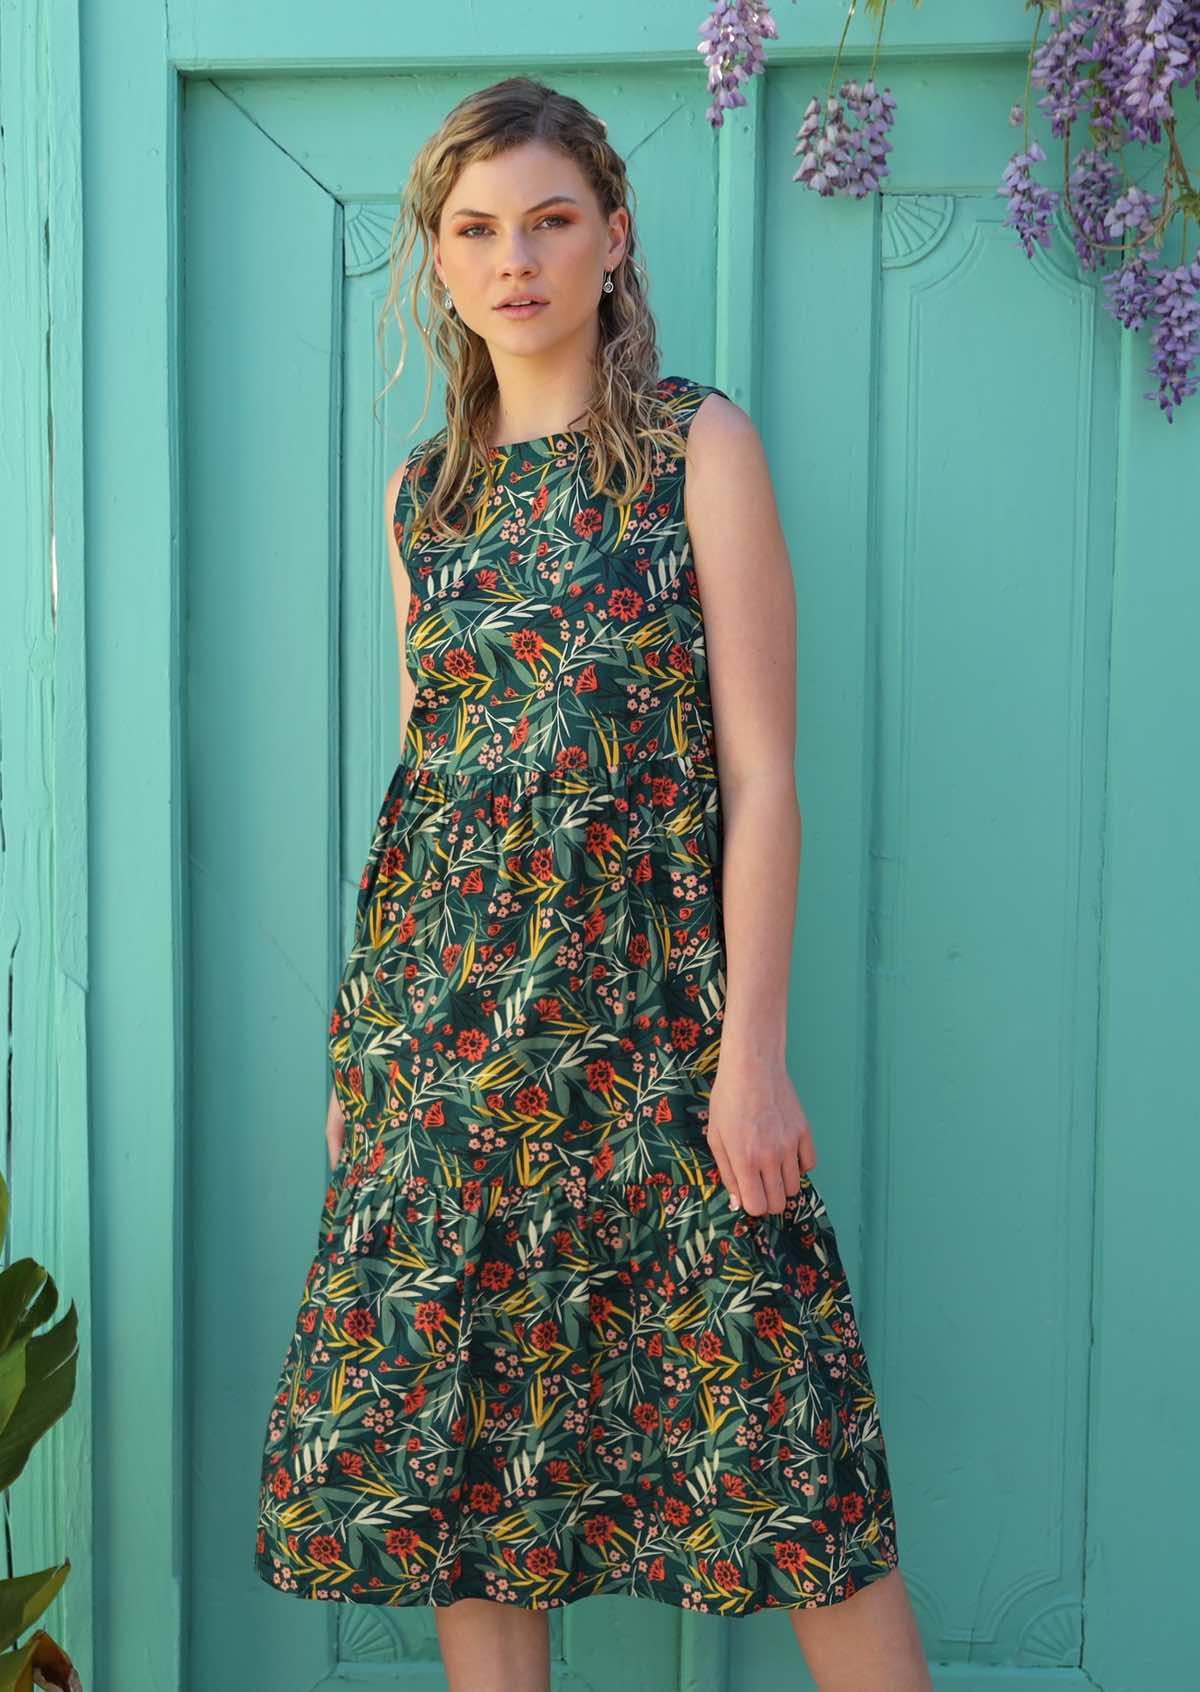 Model wears green based print with a floral pattern. 